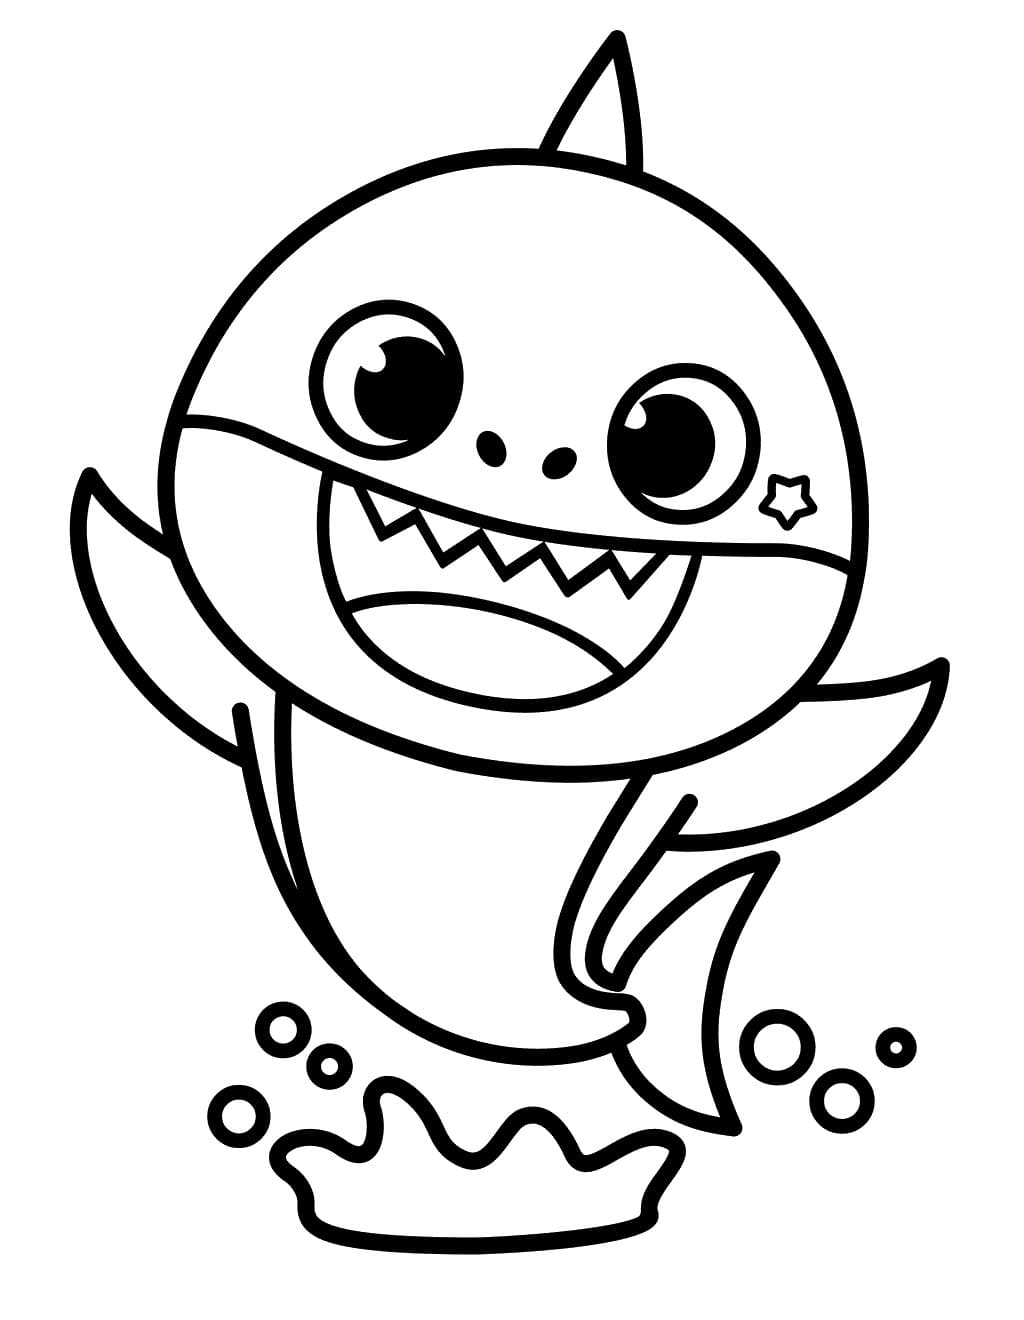 Baby Shark Jumps Coloring Page   Free Printable Coloring Pages for ...